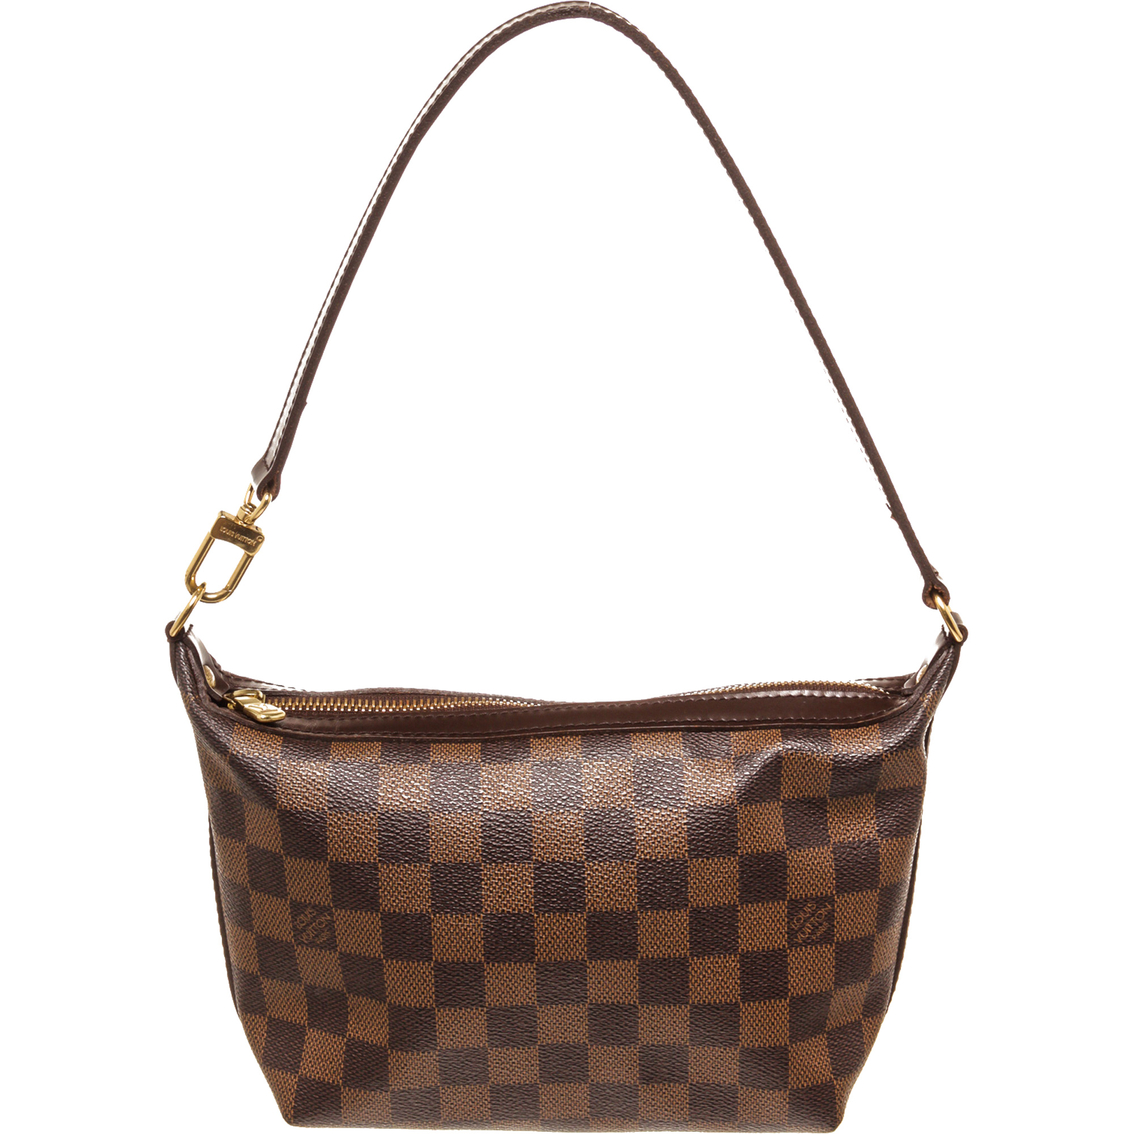 Women's Louis Vuitton Hand Bag LIKE NEW - clothing & accessories